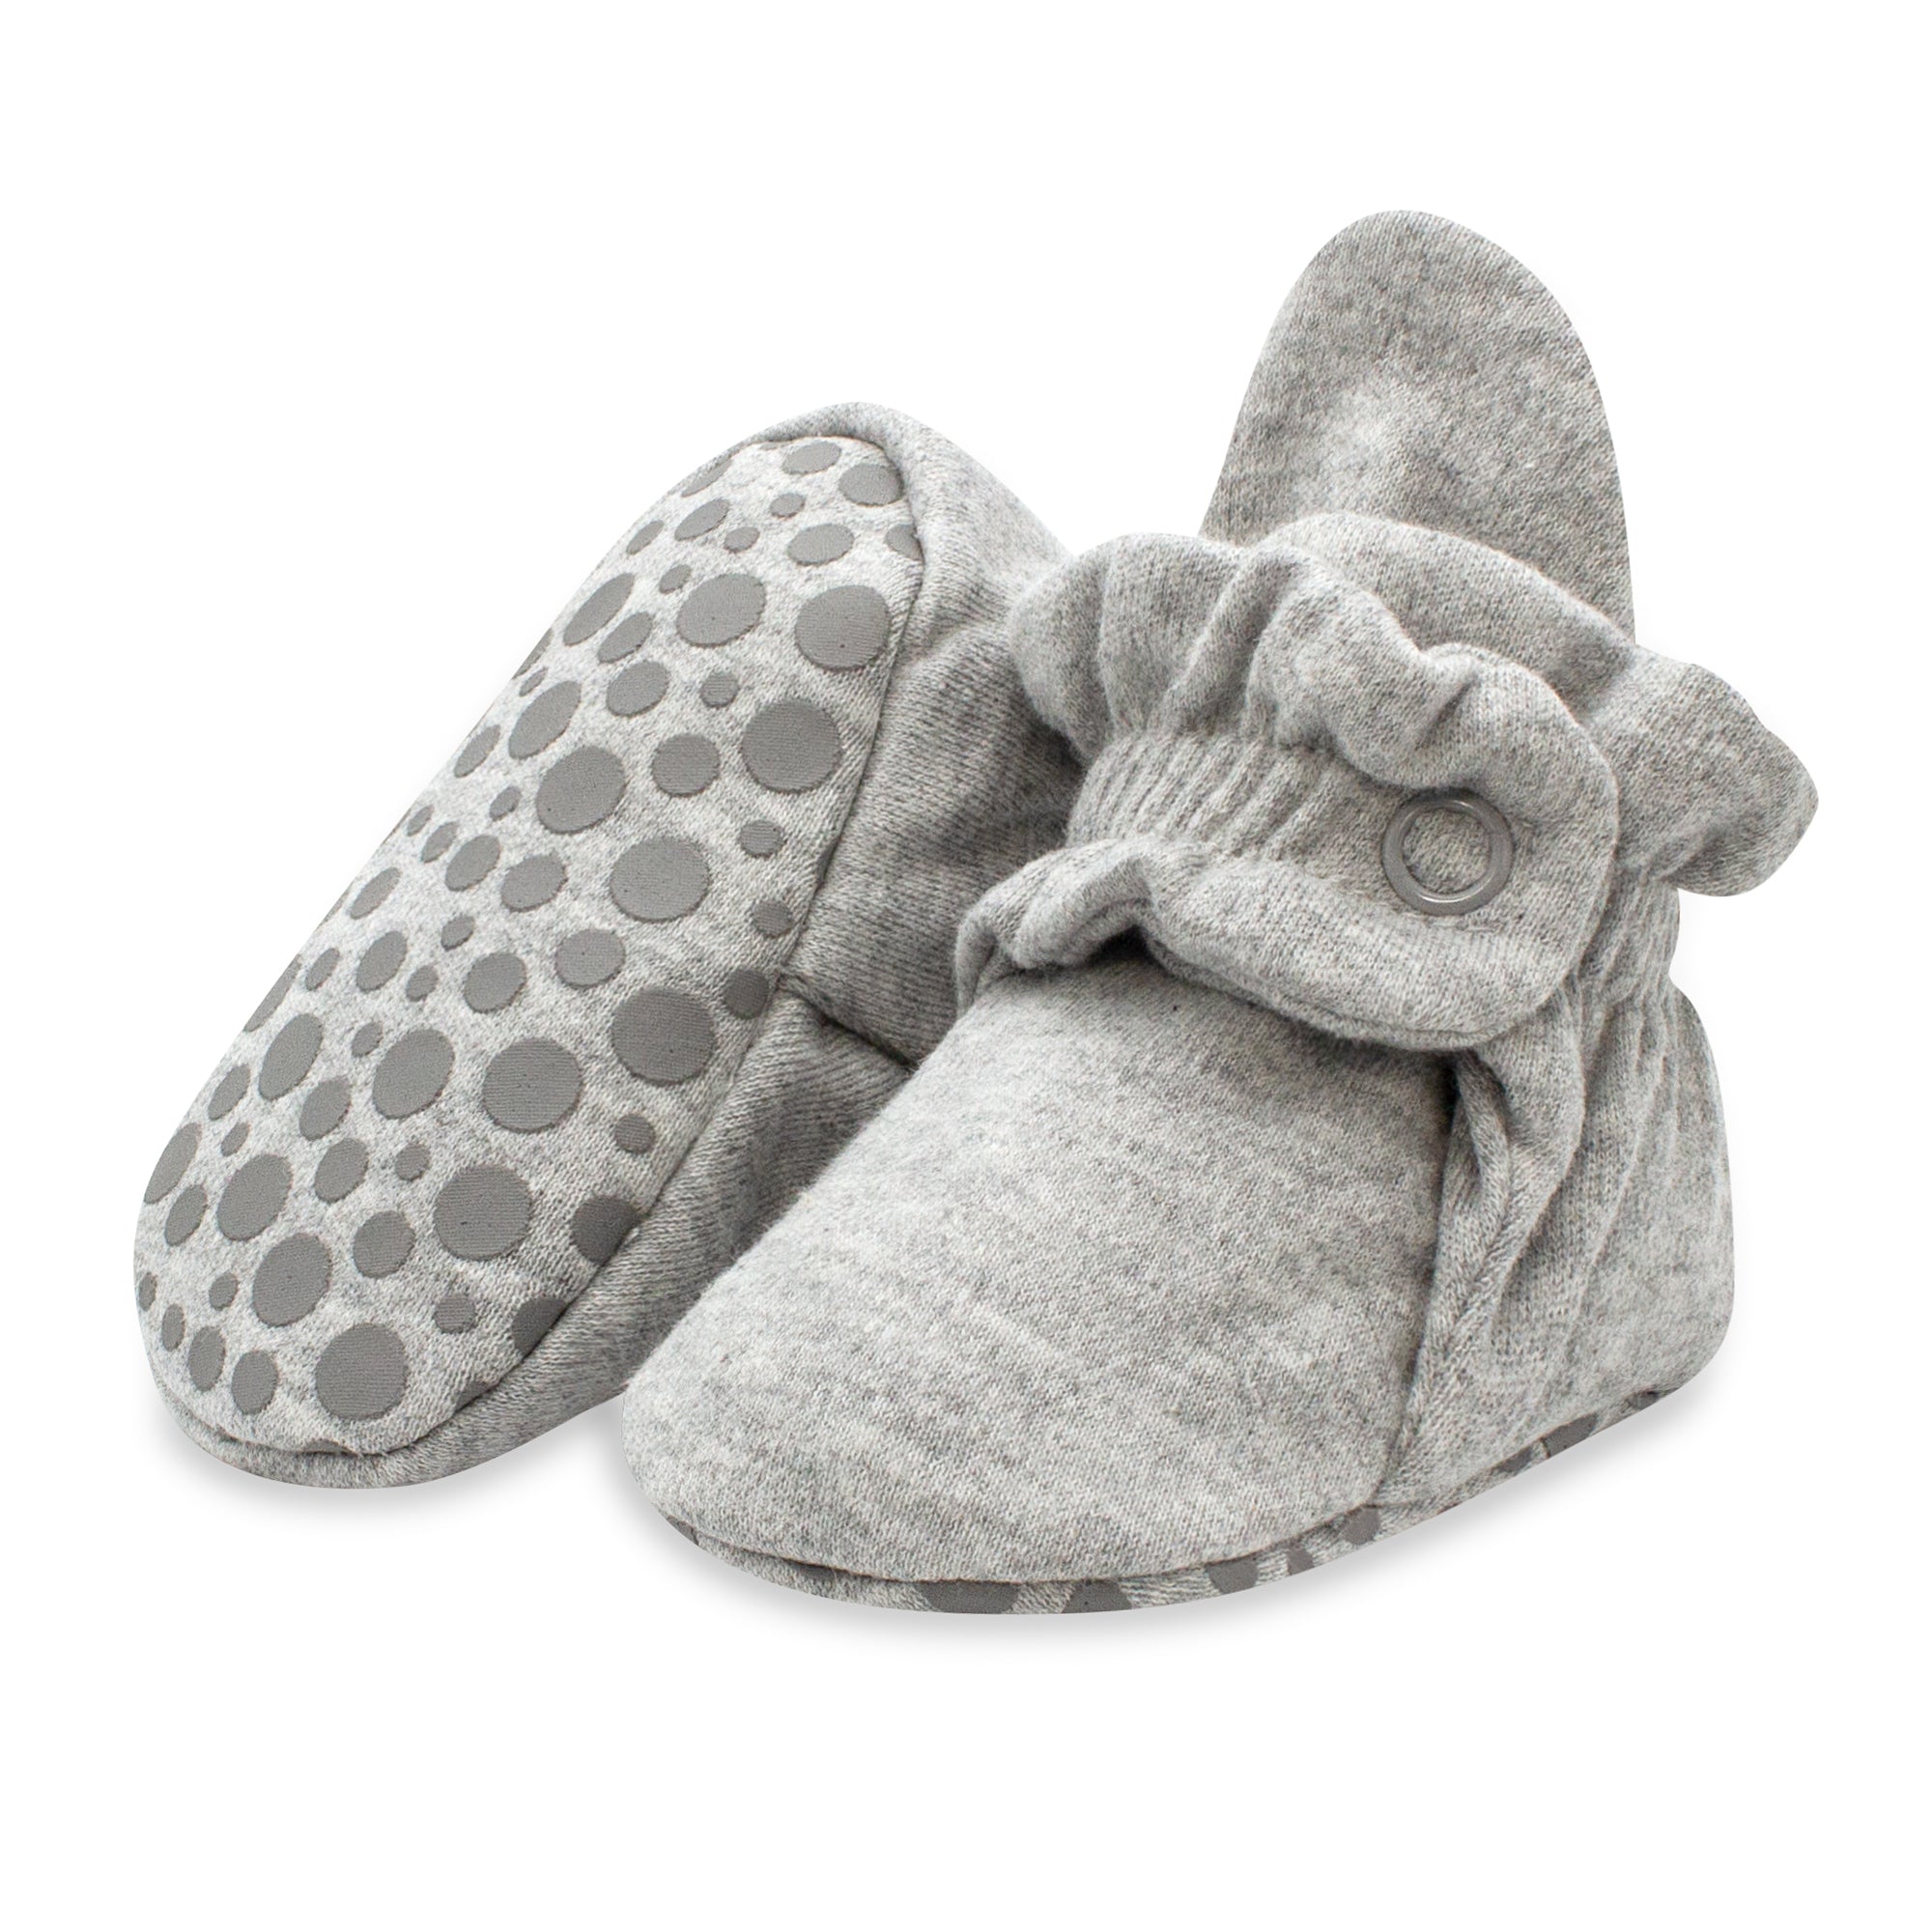 Soft Fleece Baby Booties / Infant Fishing Pattern / 0-3 Month / Soft Strap Moccasin / Snap Closure / Stay On Crib Shoe / Outdoor Photo Shoot